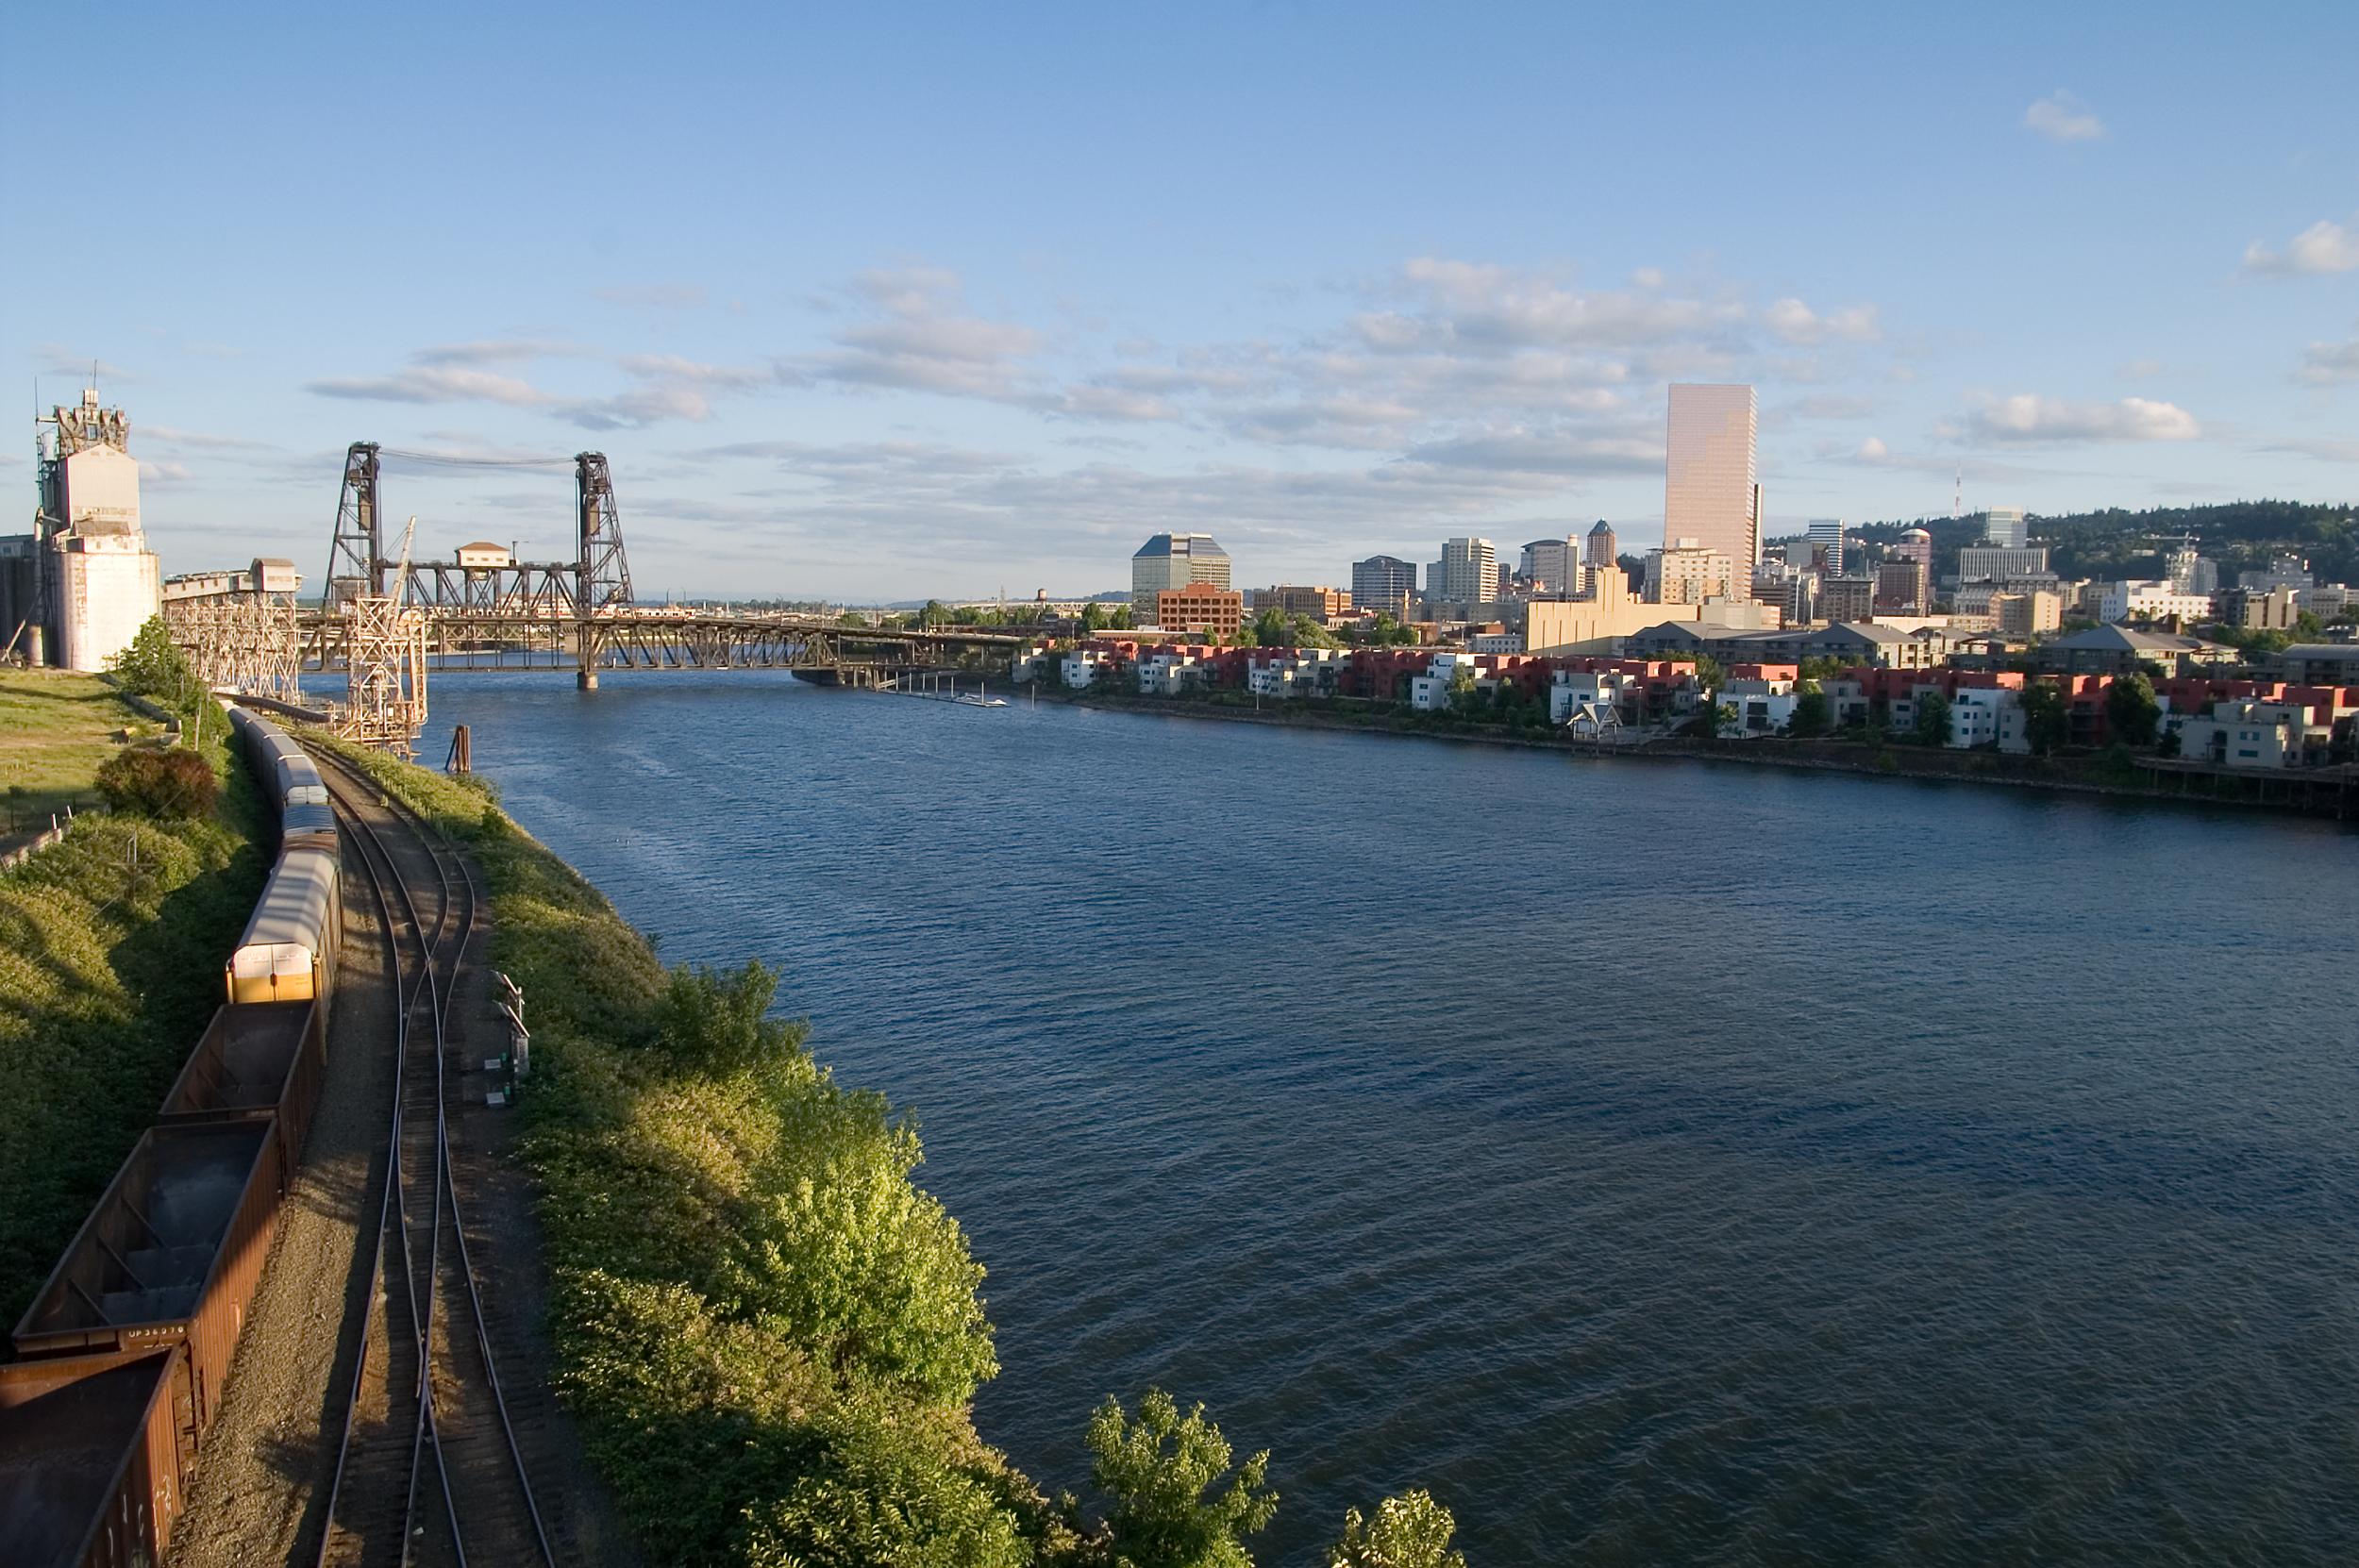 Portland sits on the Willamette River in the north-west corner of Oregon